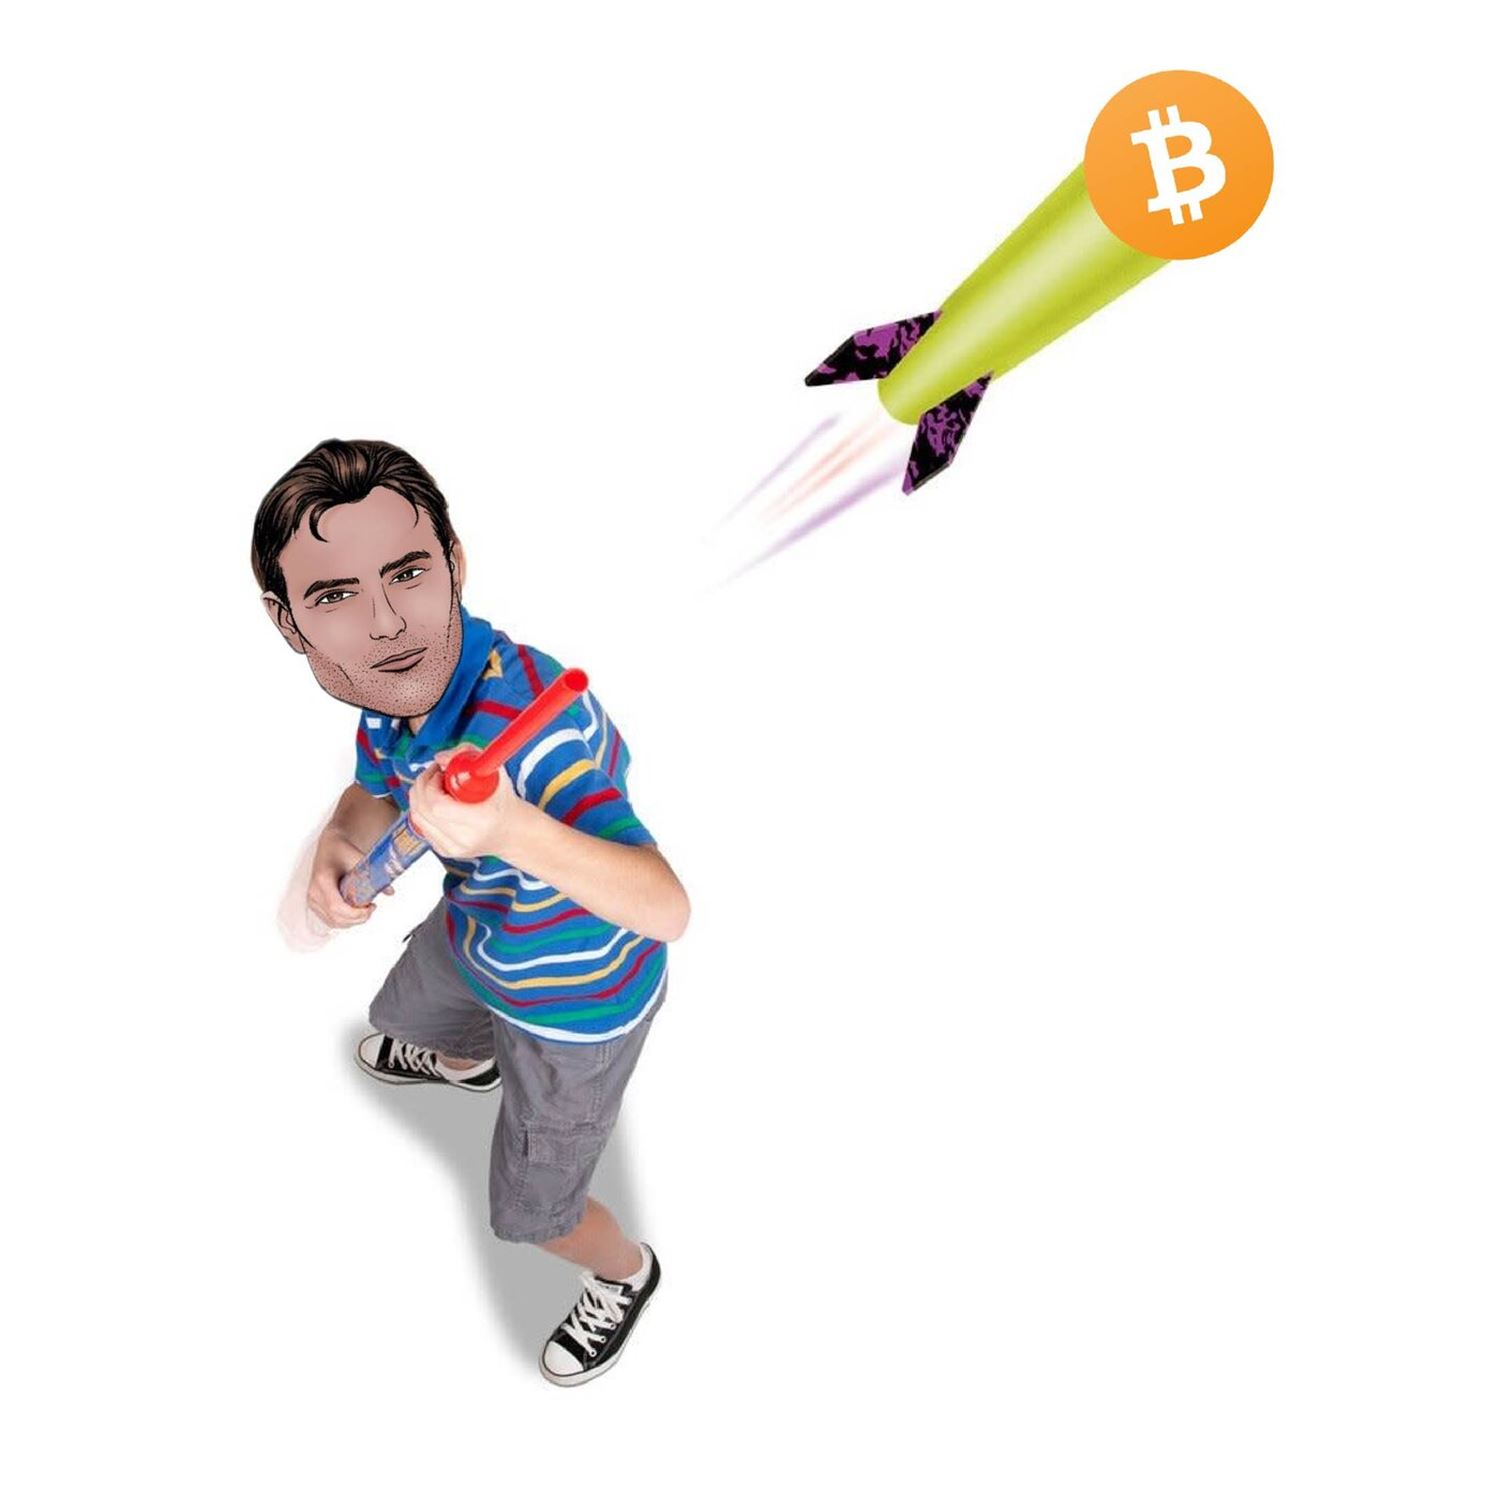 Brian is going to pump Bitcoin by destroying social media